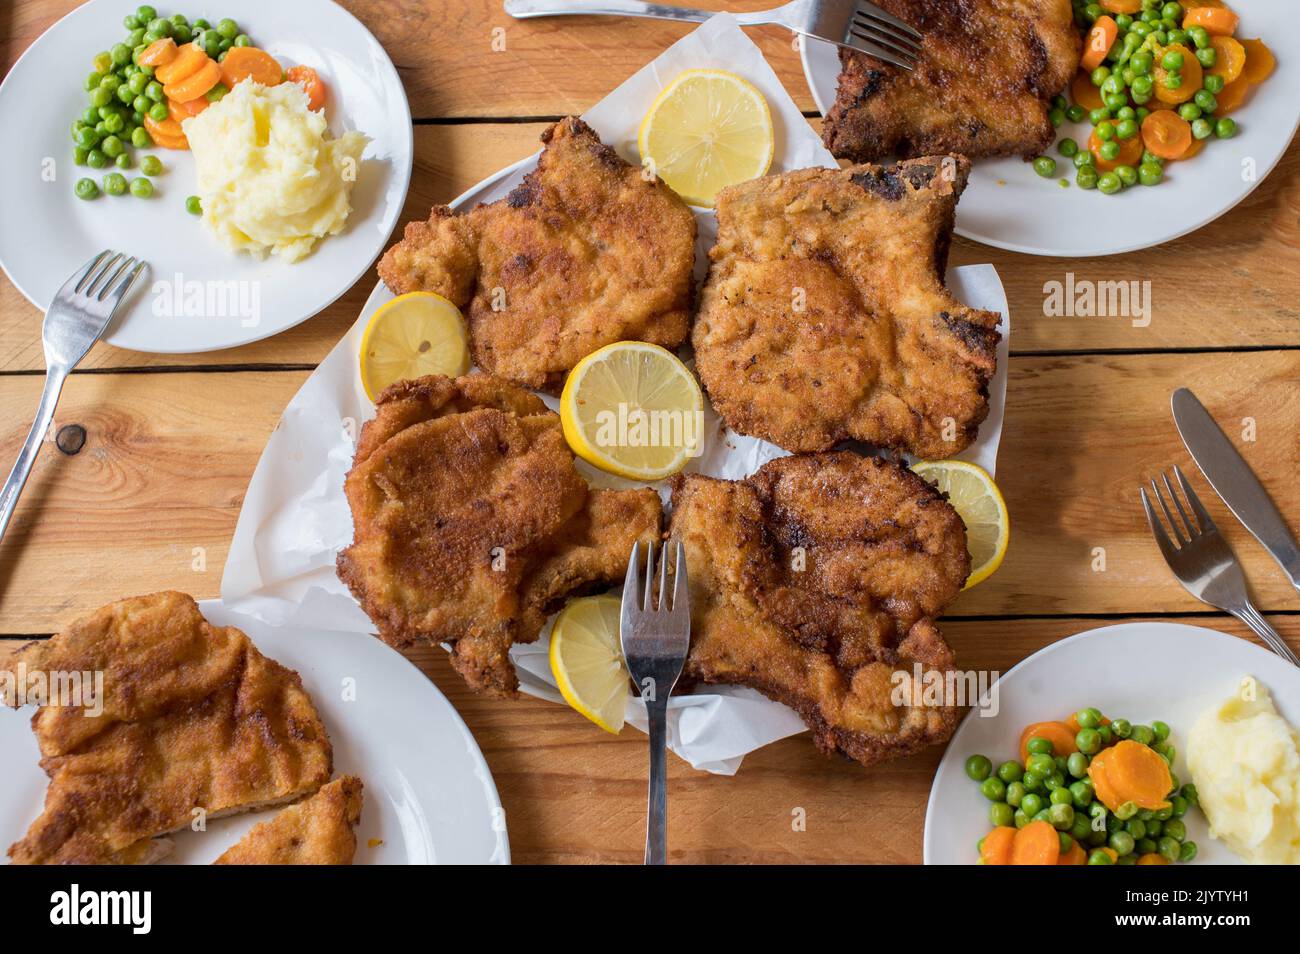 Family dinner table with breaded pork chops or cutlets, mashed potatoes and vegetables Stock Photo